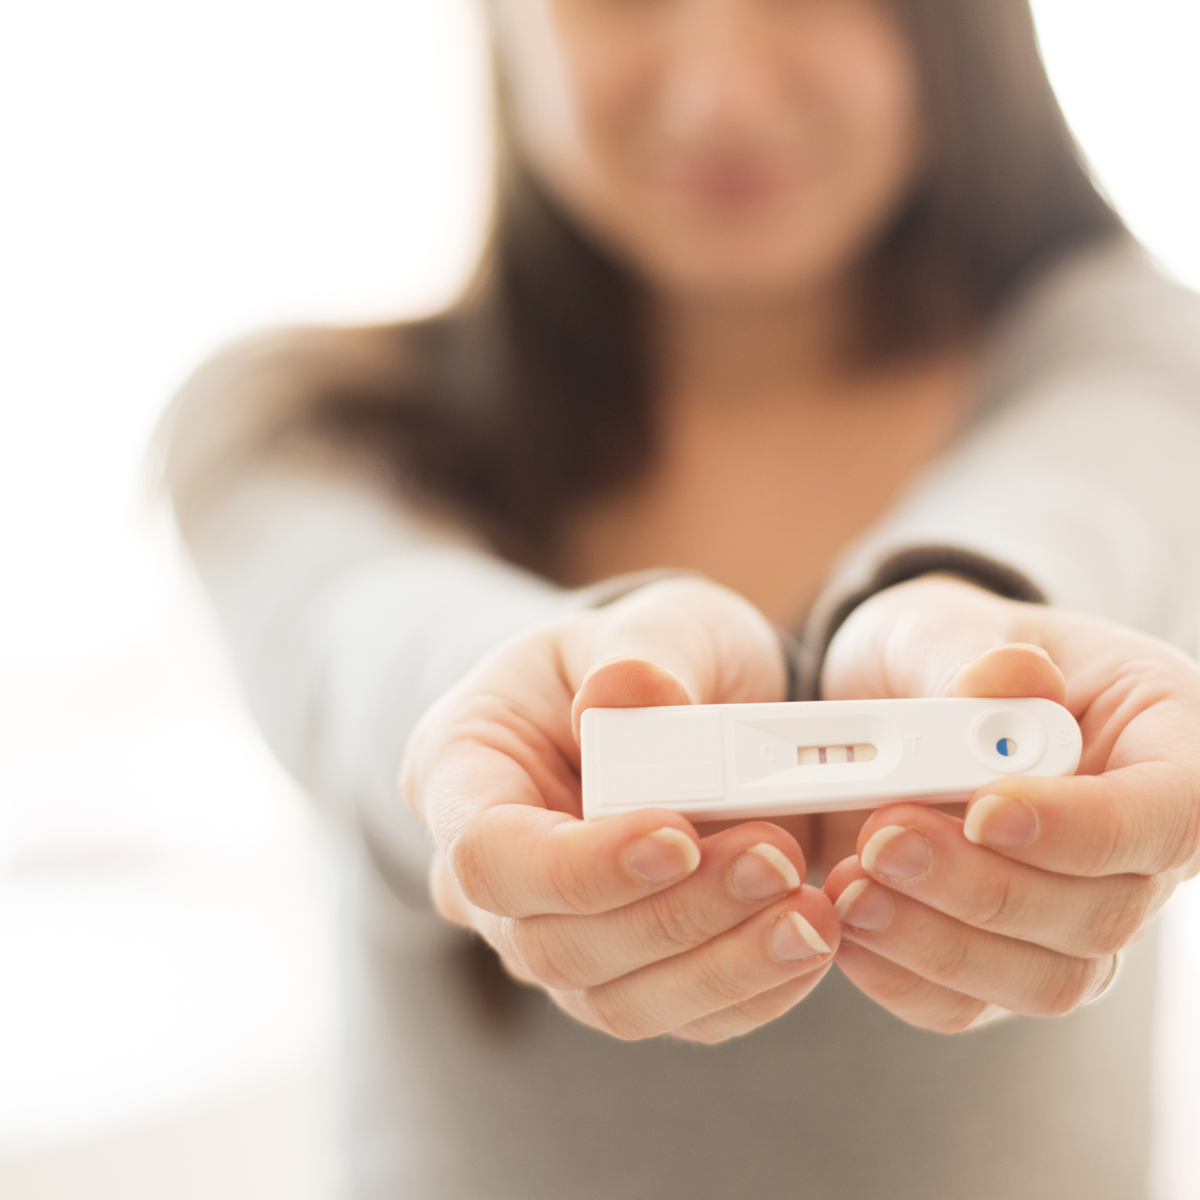 Woman holding pregnancy test up